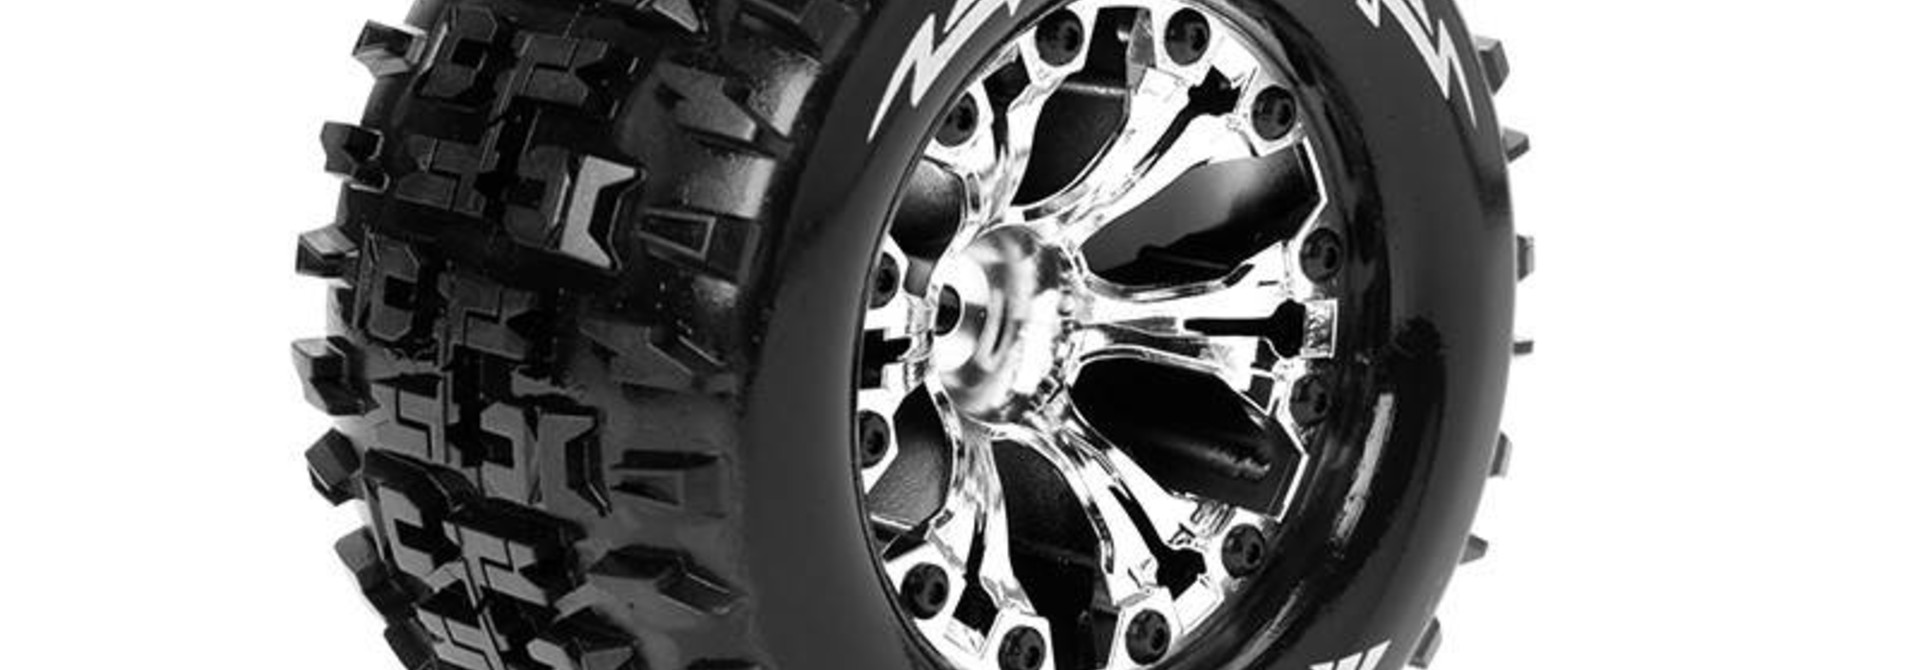 Louise RC - MT-PIONEER - 1-10 Monster Truck Tire Set - Mounted - Sport - Chrome 2.8 Rims - 1/2-Offset - Hex 12mm - L-T3202SCH